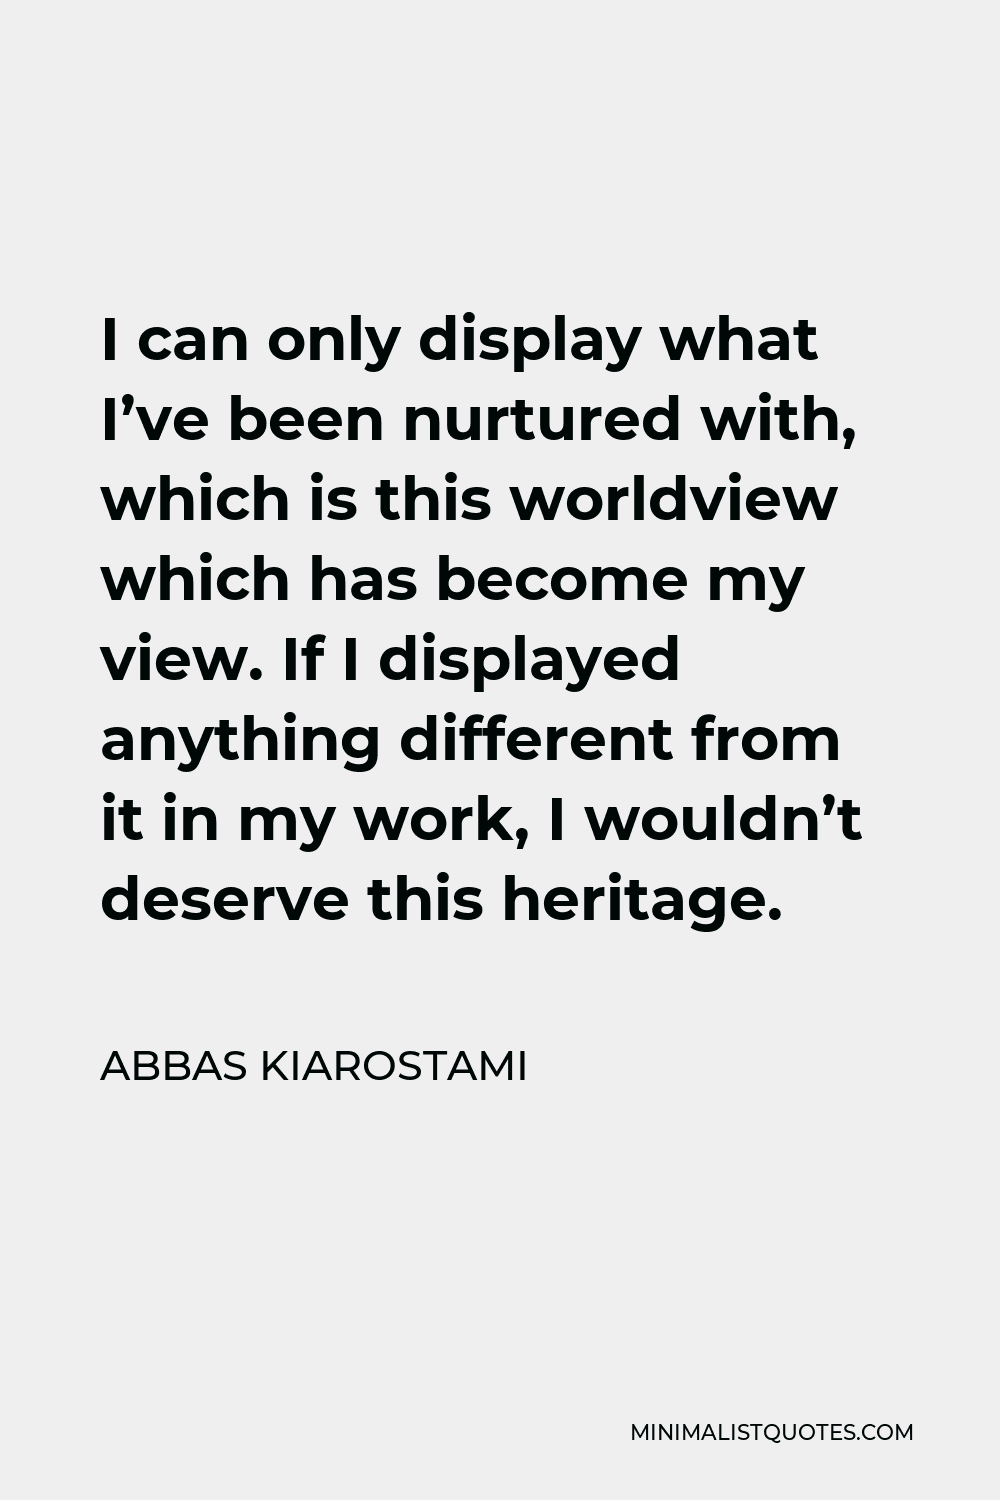 Abbas Kiarostami Quote - I can only display what I’ve been nurtured with, which is this worldview which has become my view. If I displayed anything different from it in my work, I wouldn’t deserve this heritage.